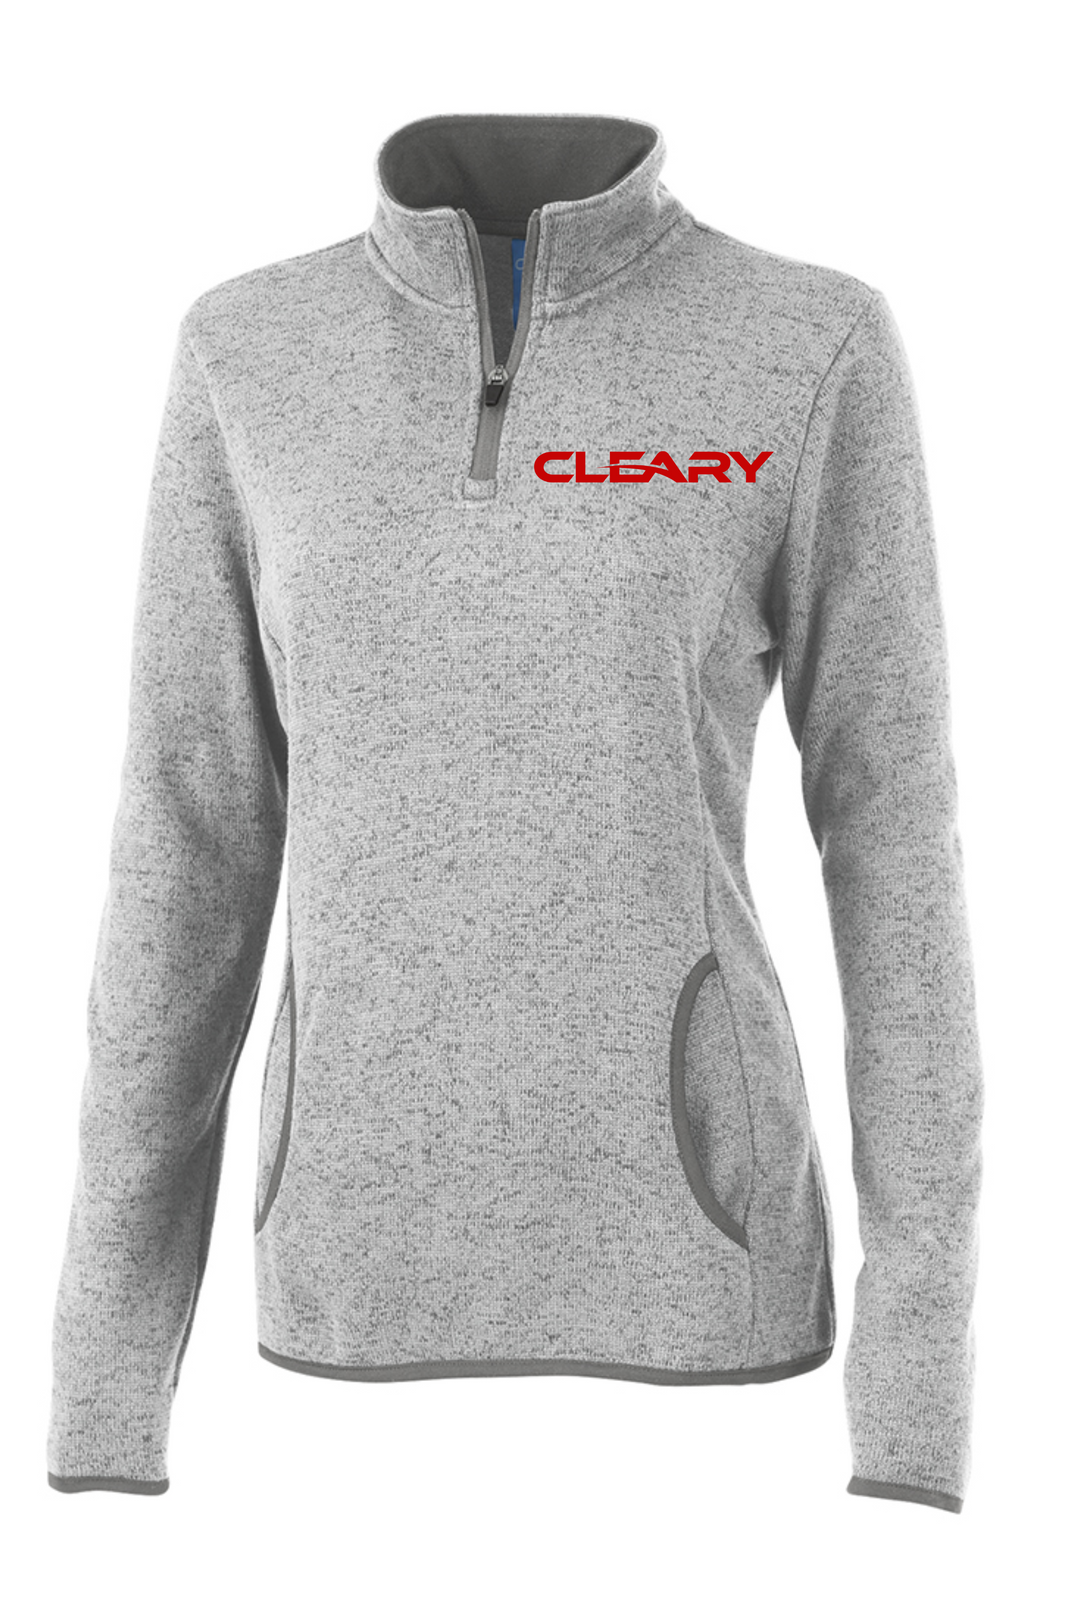 Cleary's Women's Heathered Fleece Pullover Light Grey